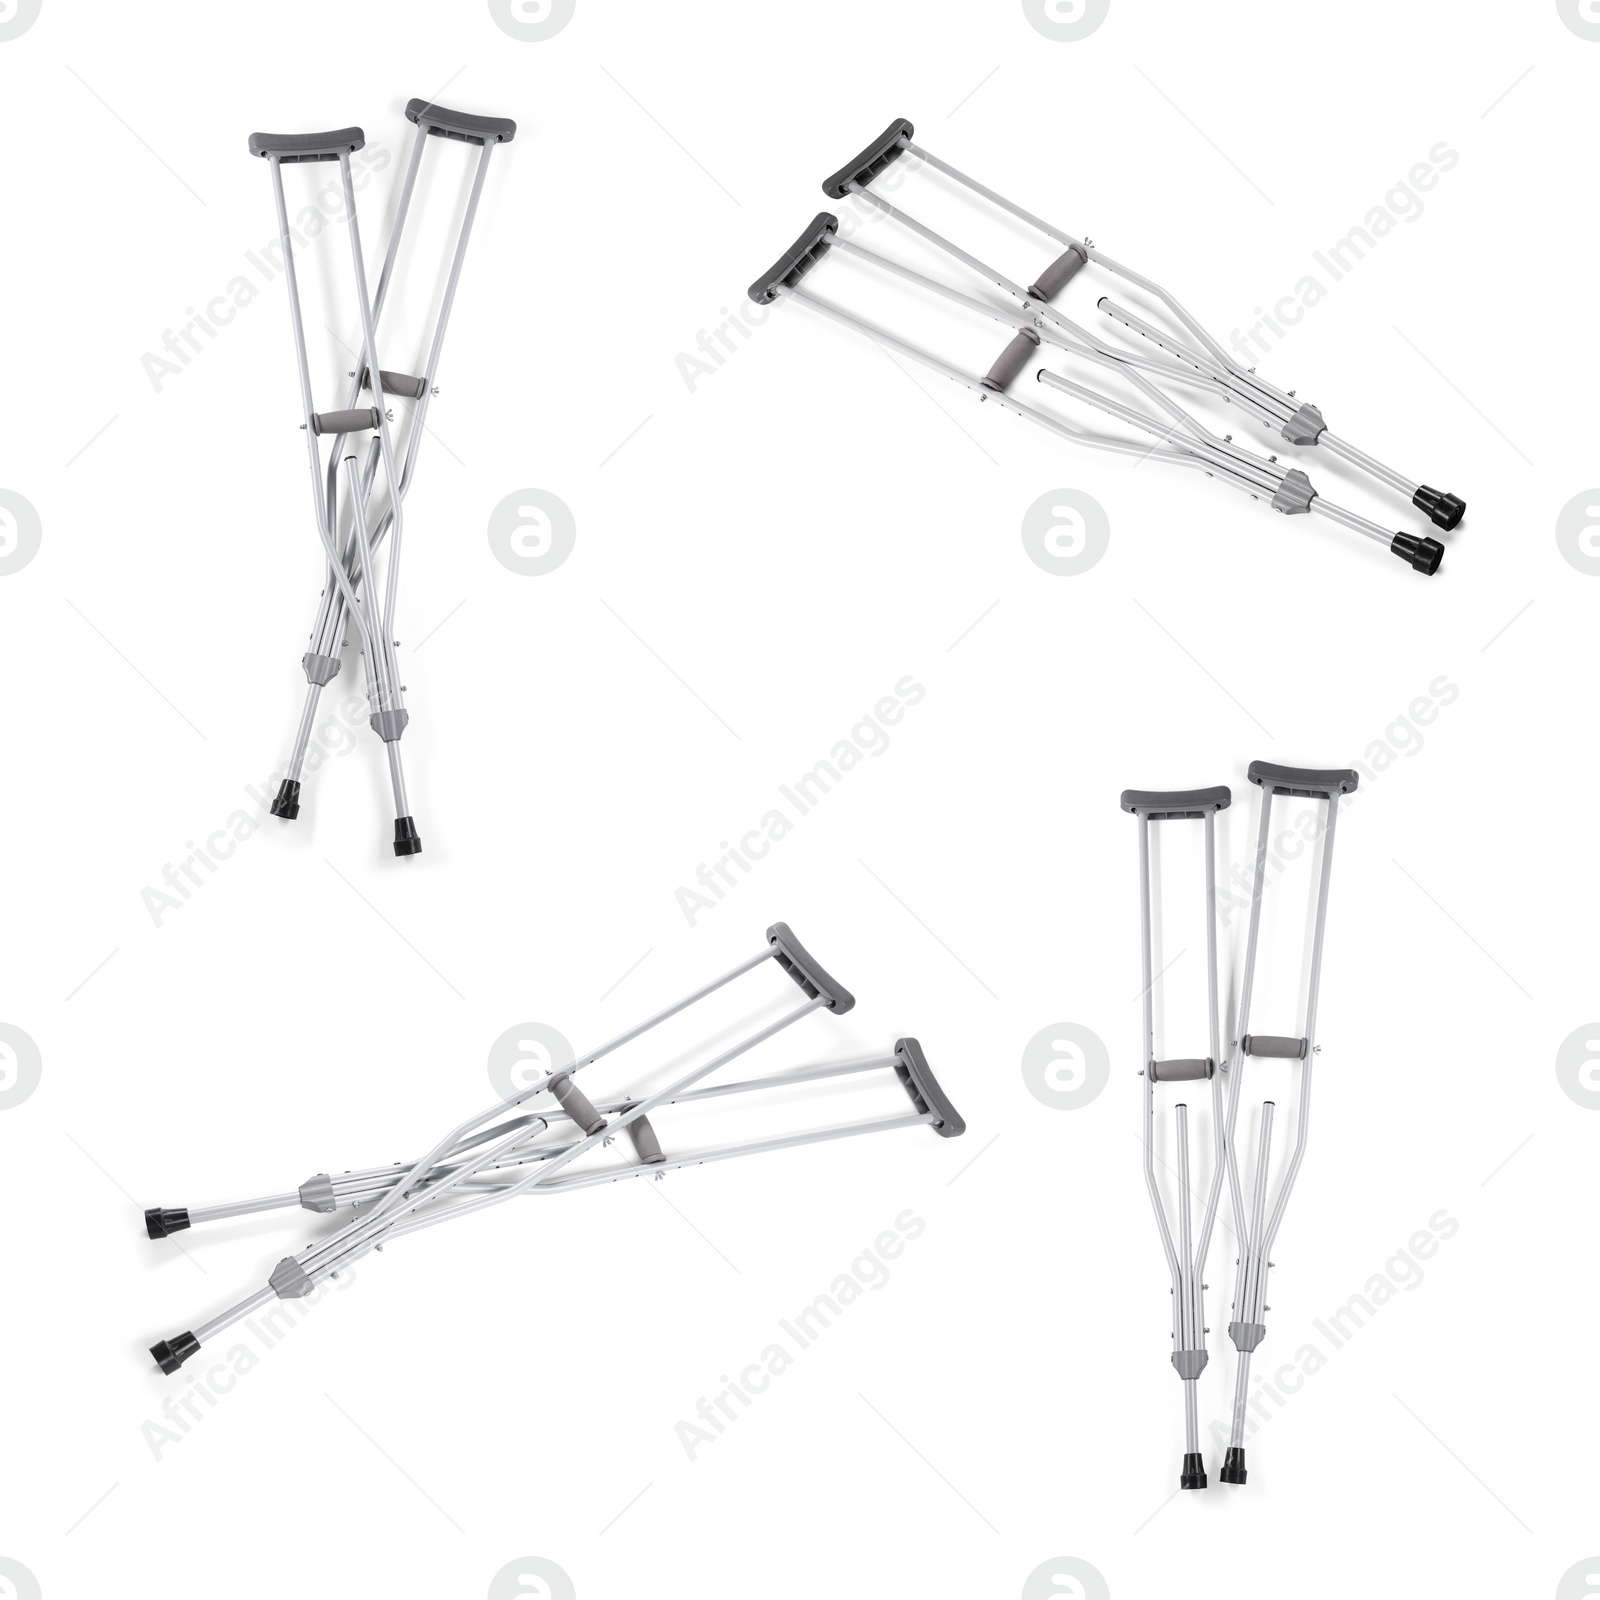 Image of Set with axillary crutches on white background